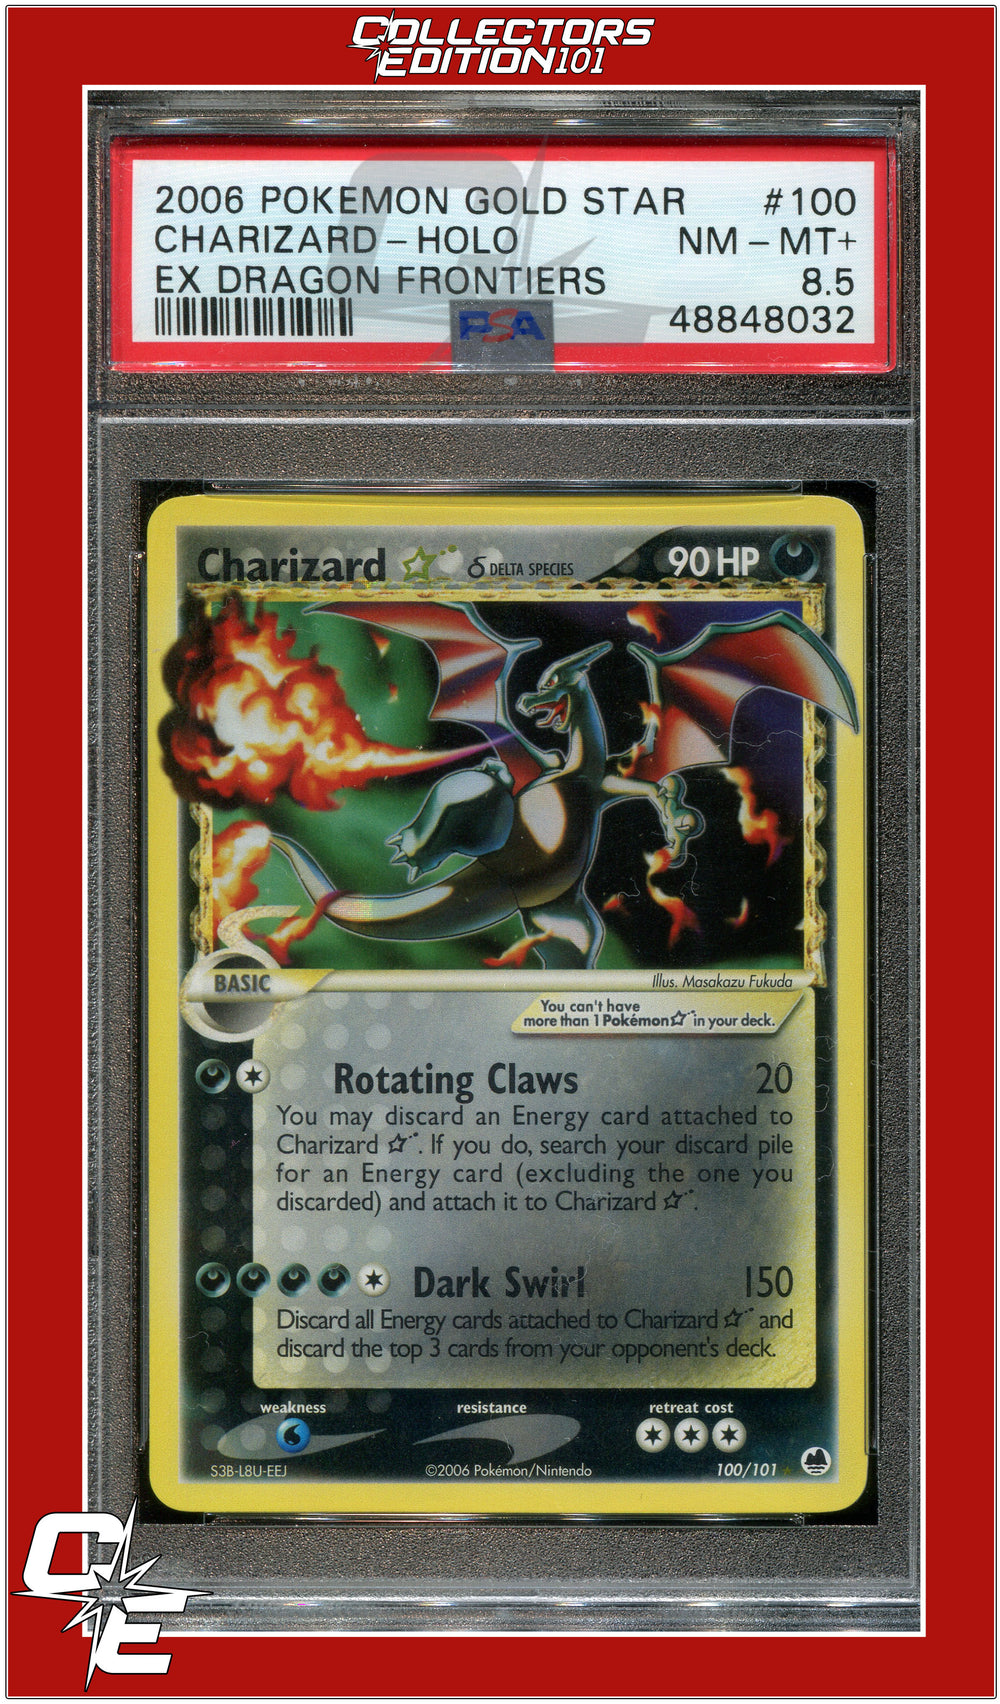 EX Dragon Frontiers 100 Charizard Holo Gold Star PSA 8.5